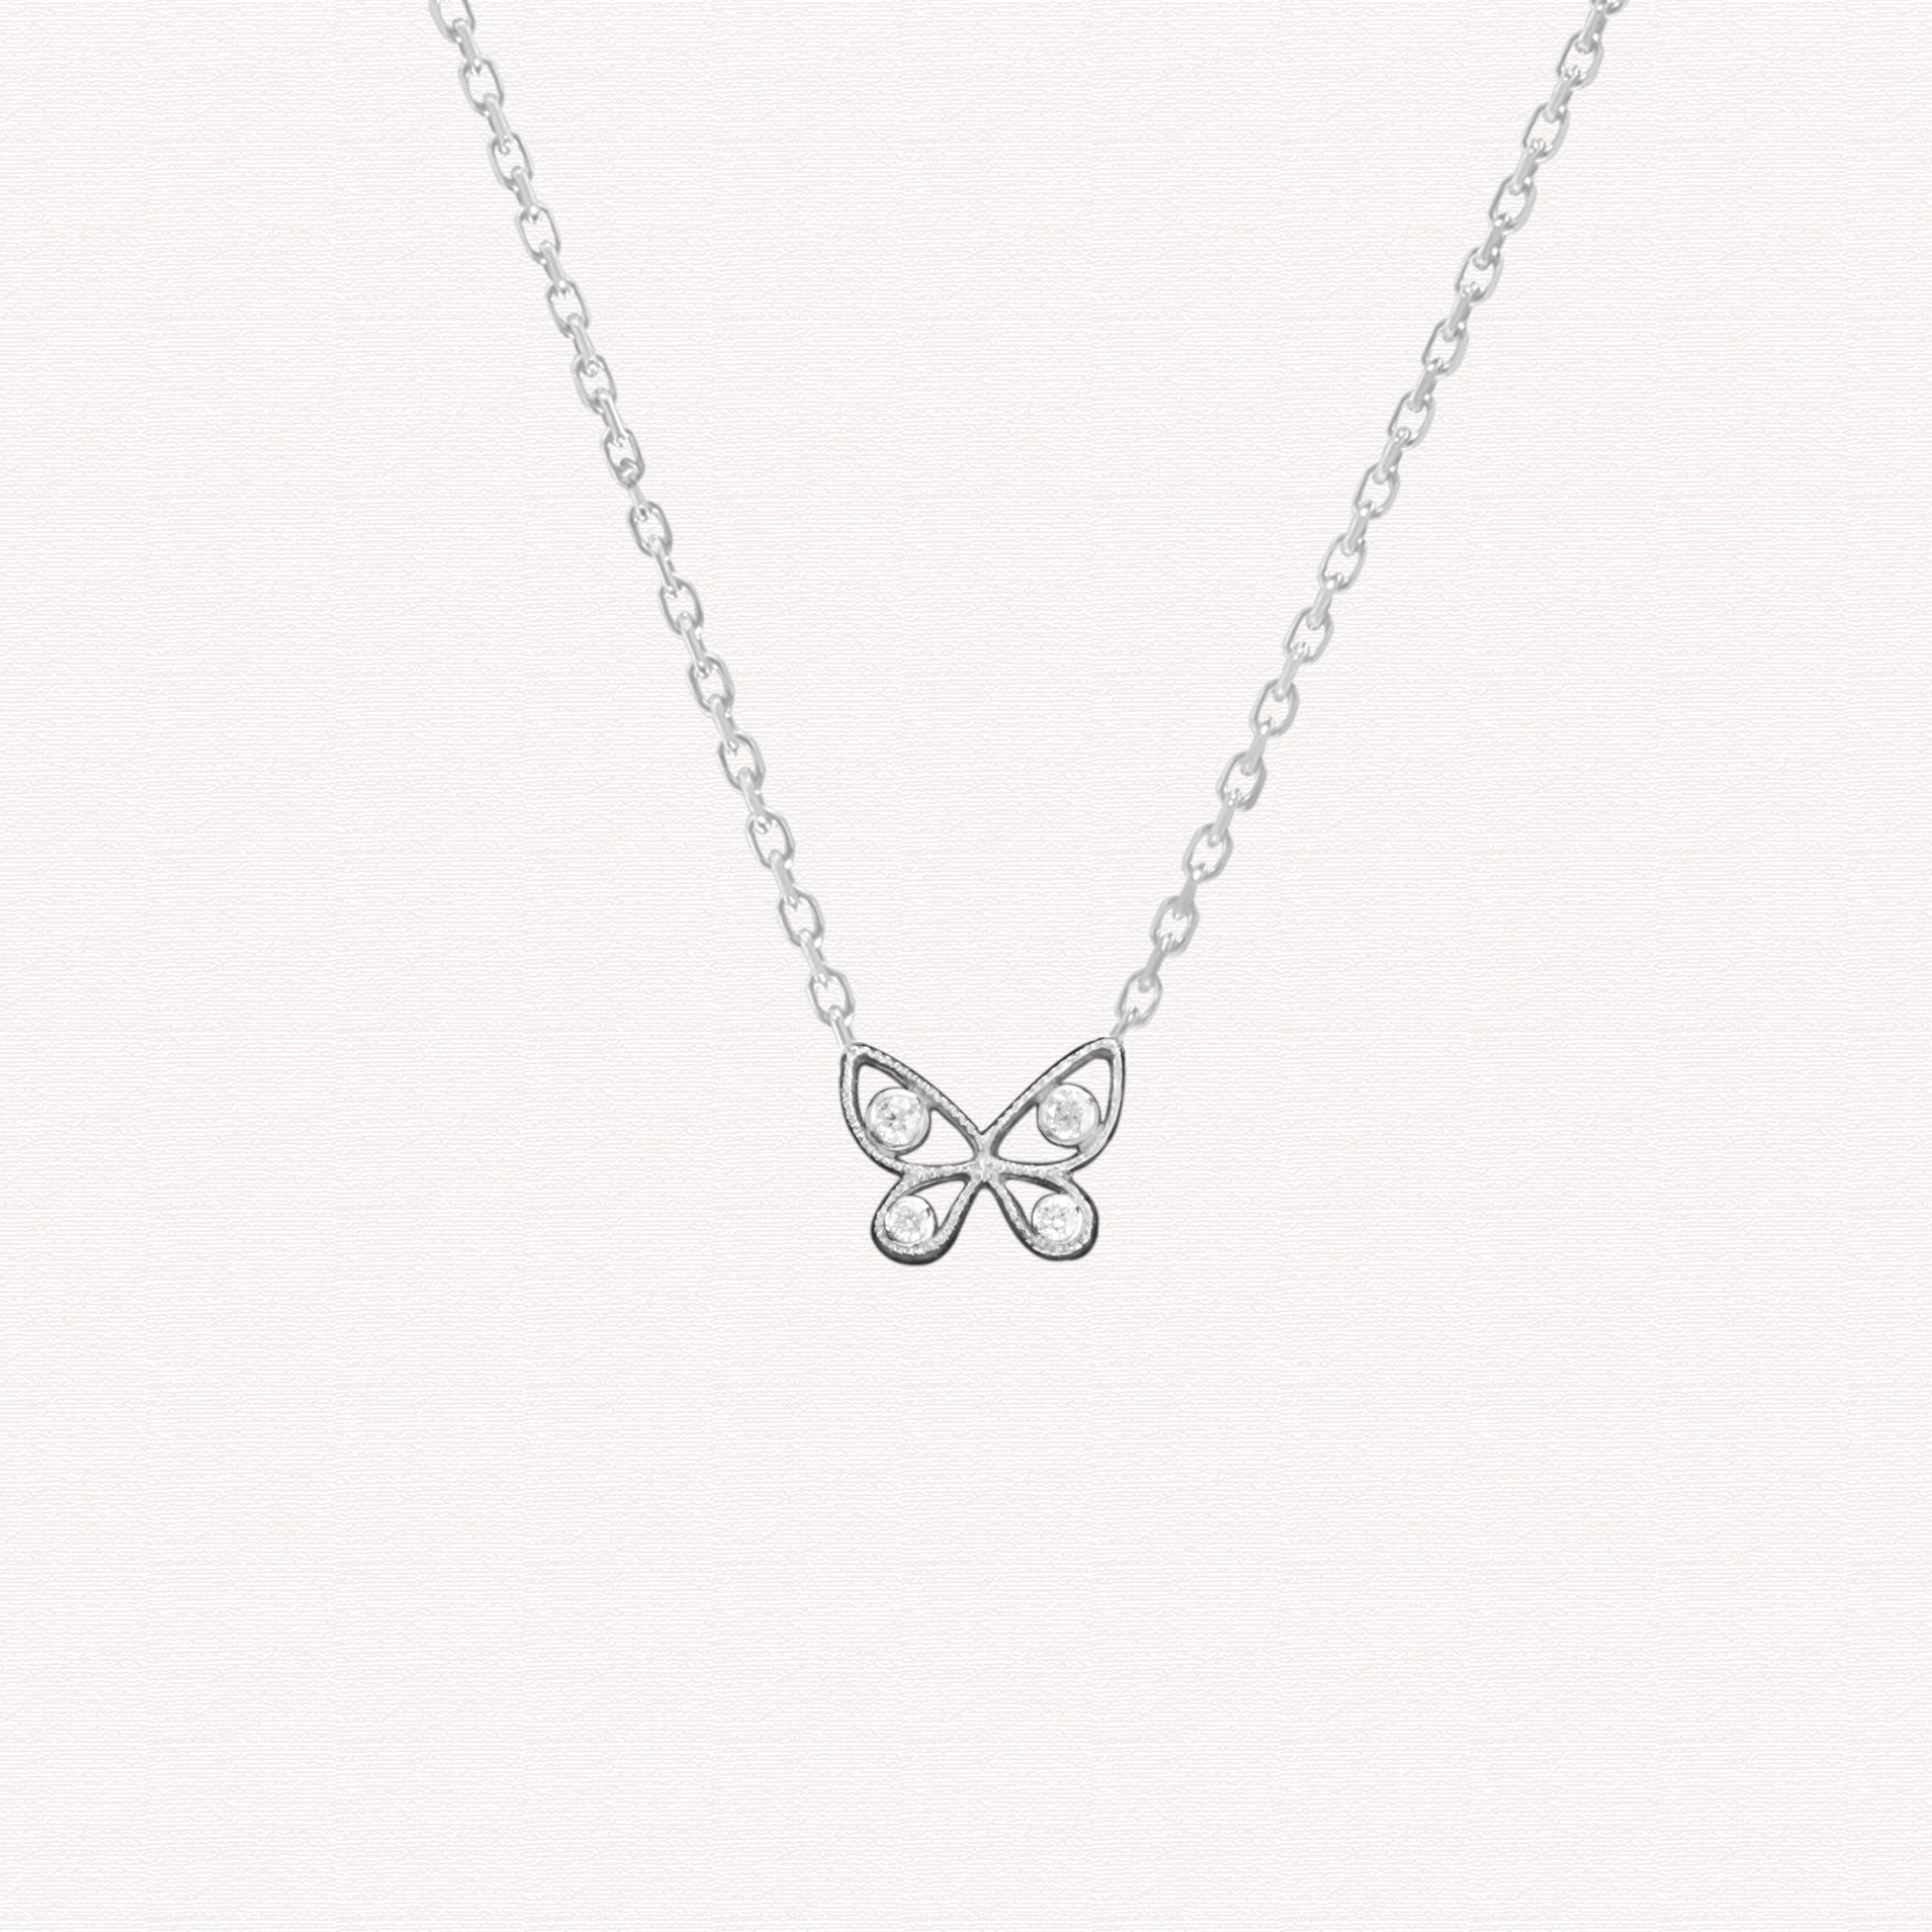 Necklace - Mini butterfly